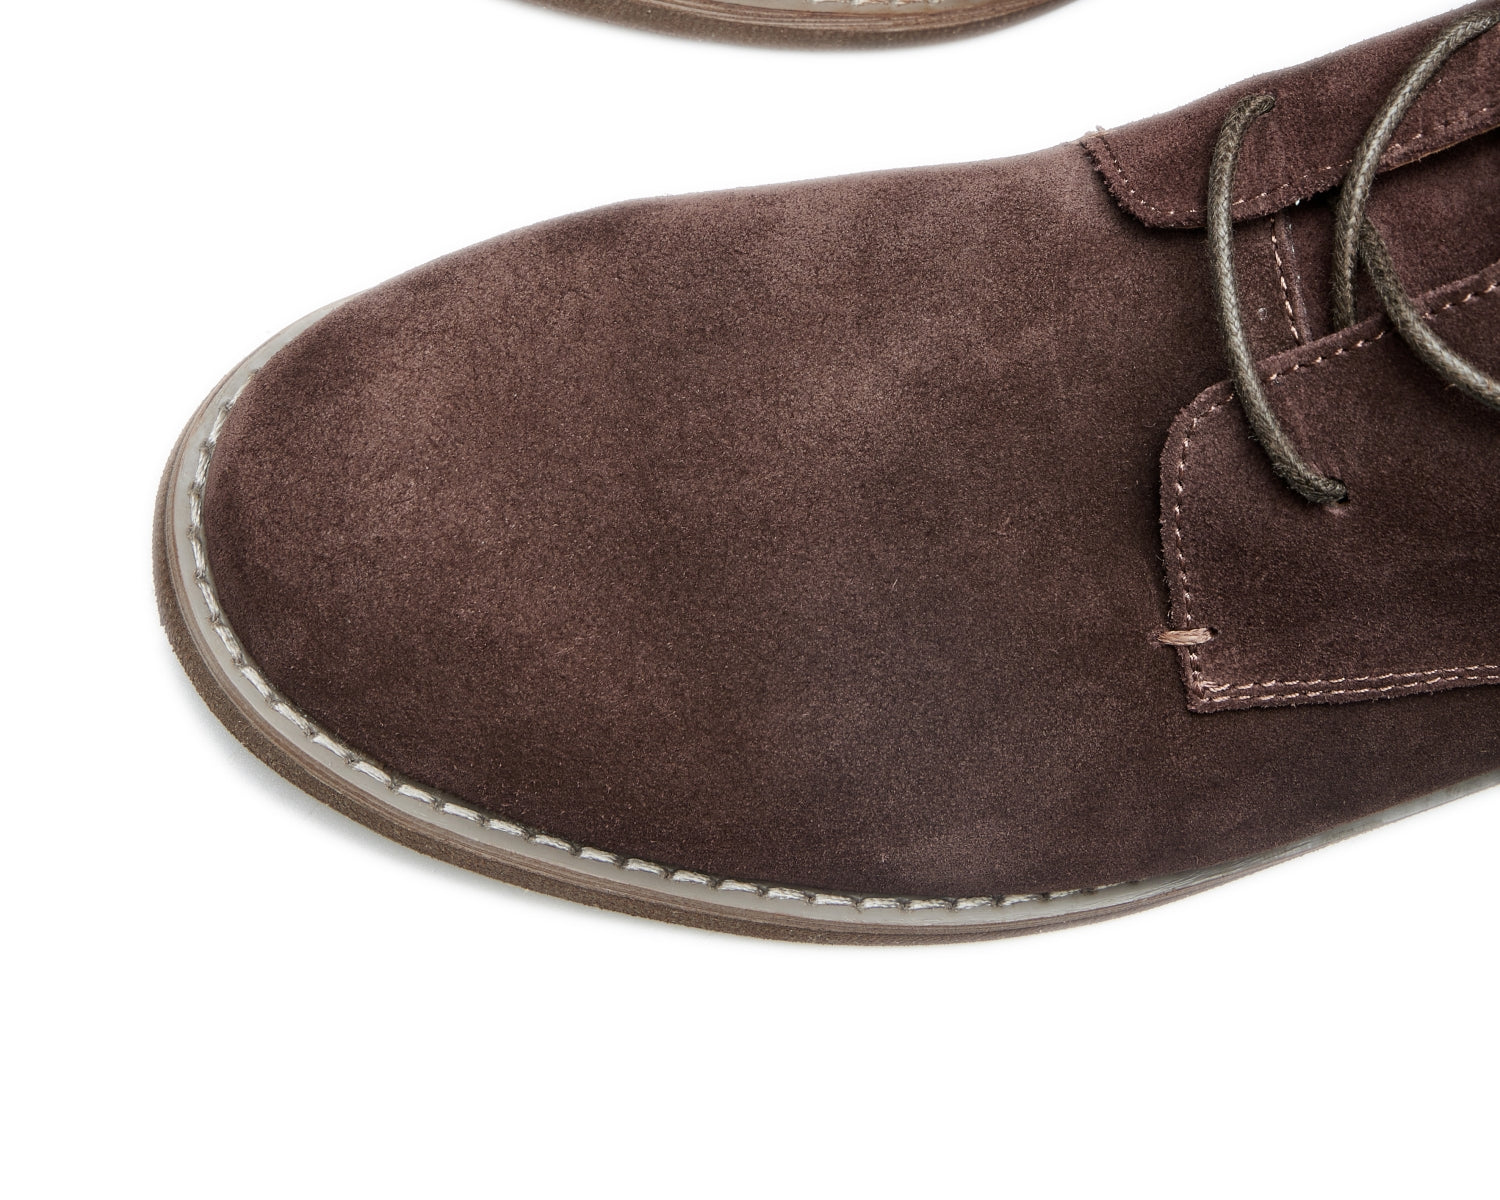 Men's suede chukka boots in various styles including manner, old, and skin designs8